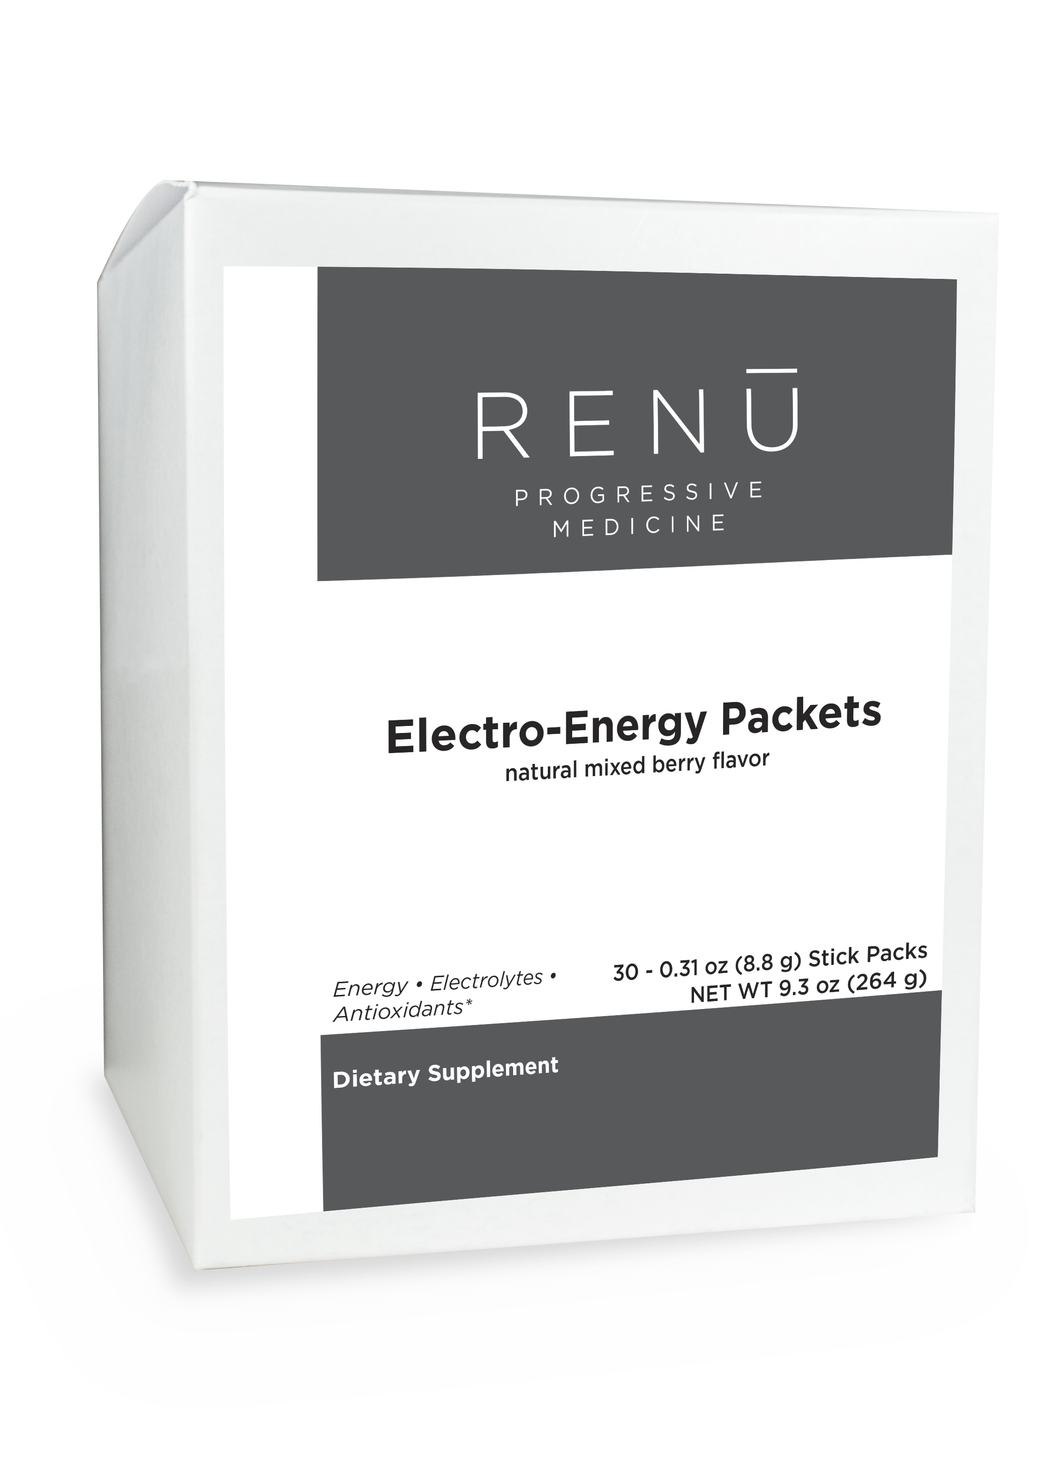 Electro-Energy Packets